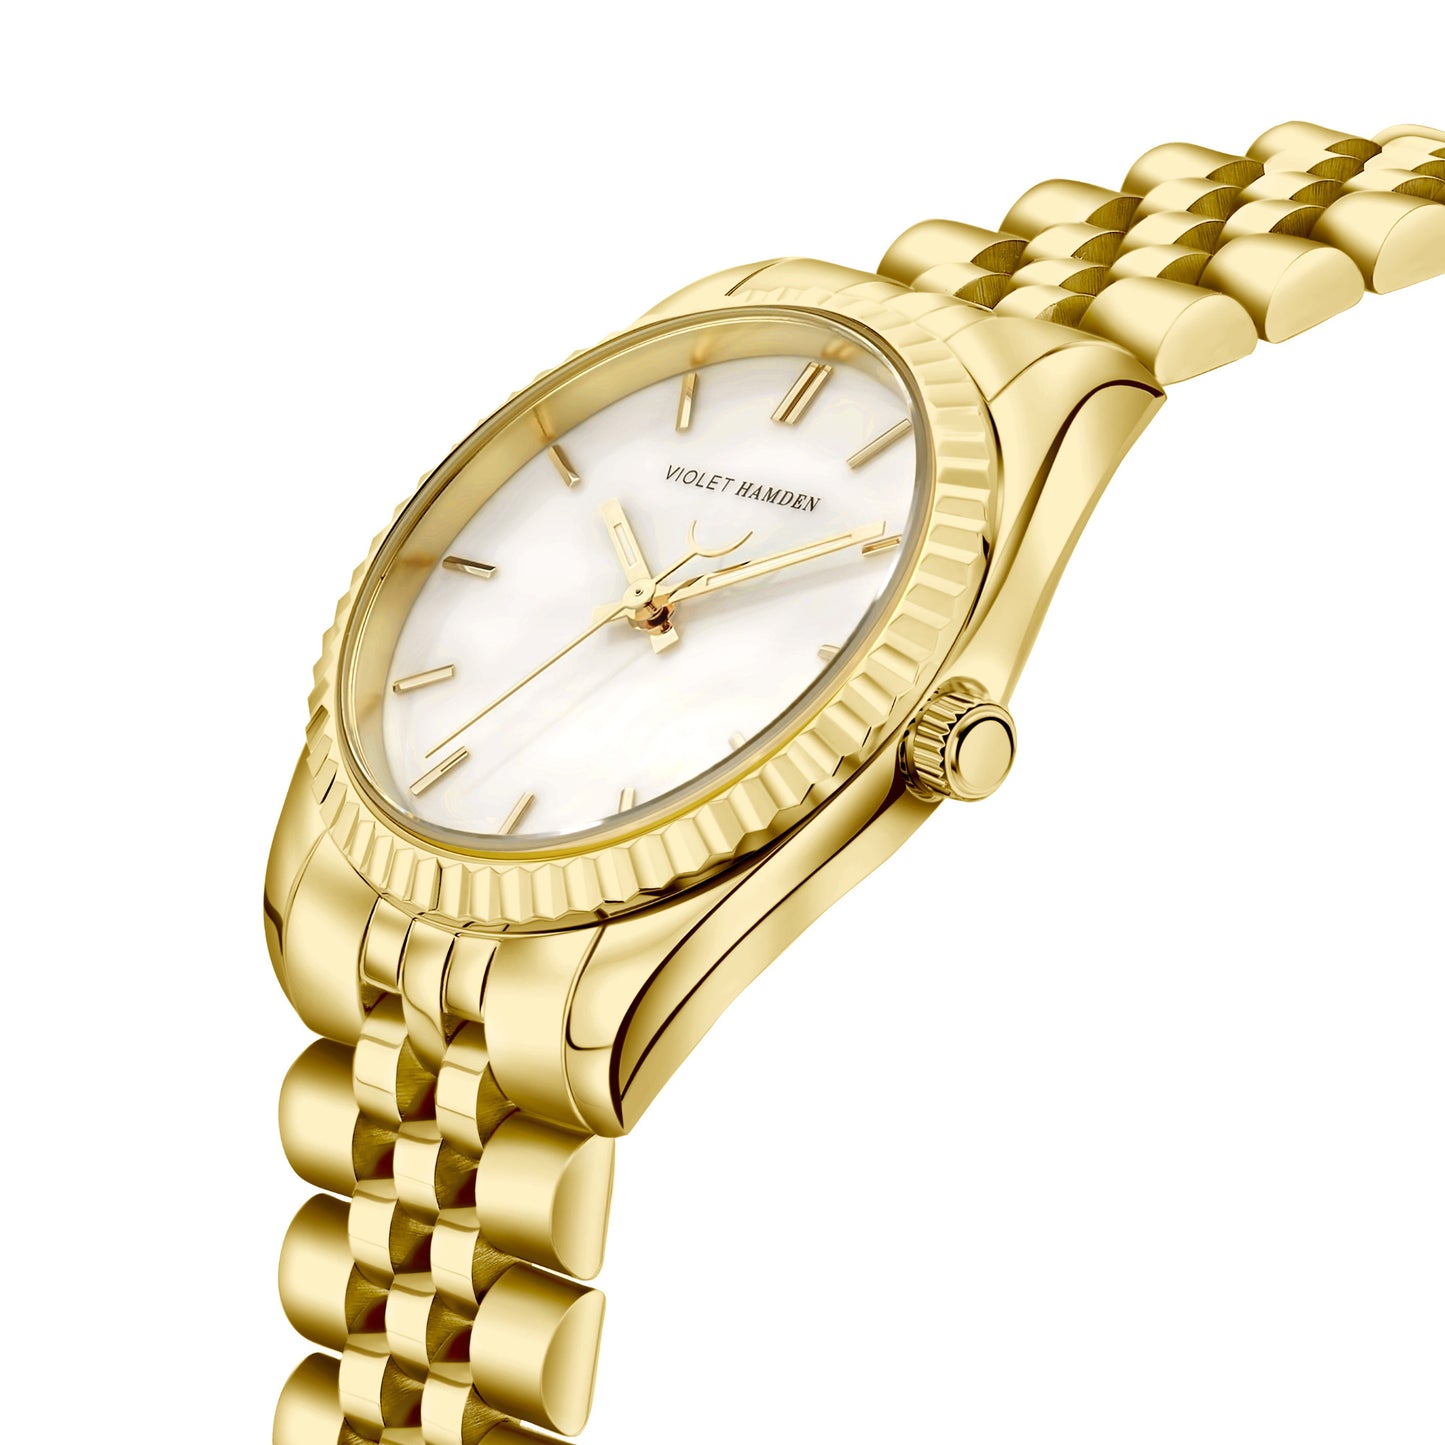 Sunrise round ladies watch gold coloured and mother of pearl